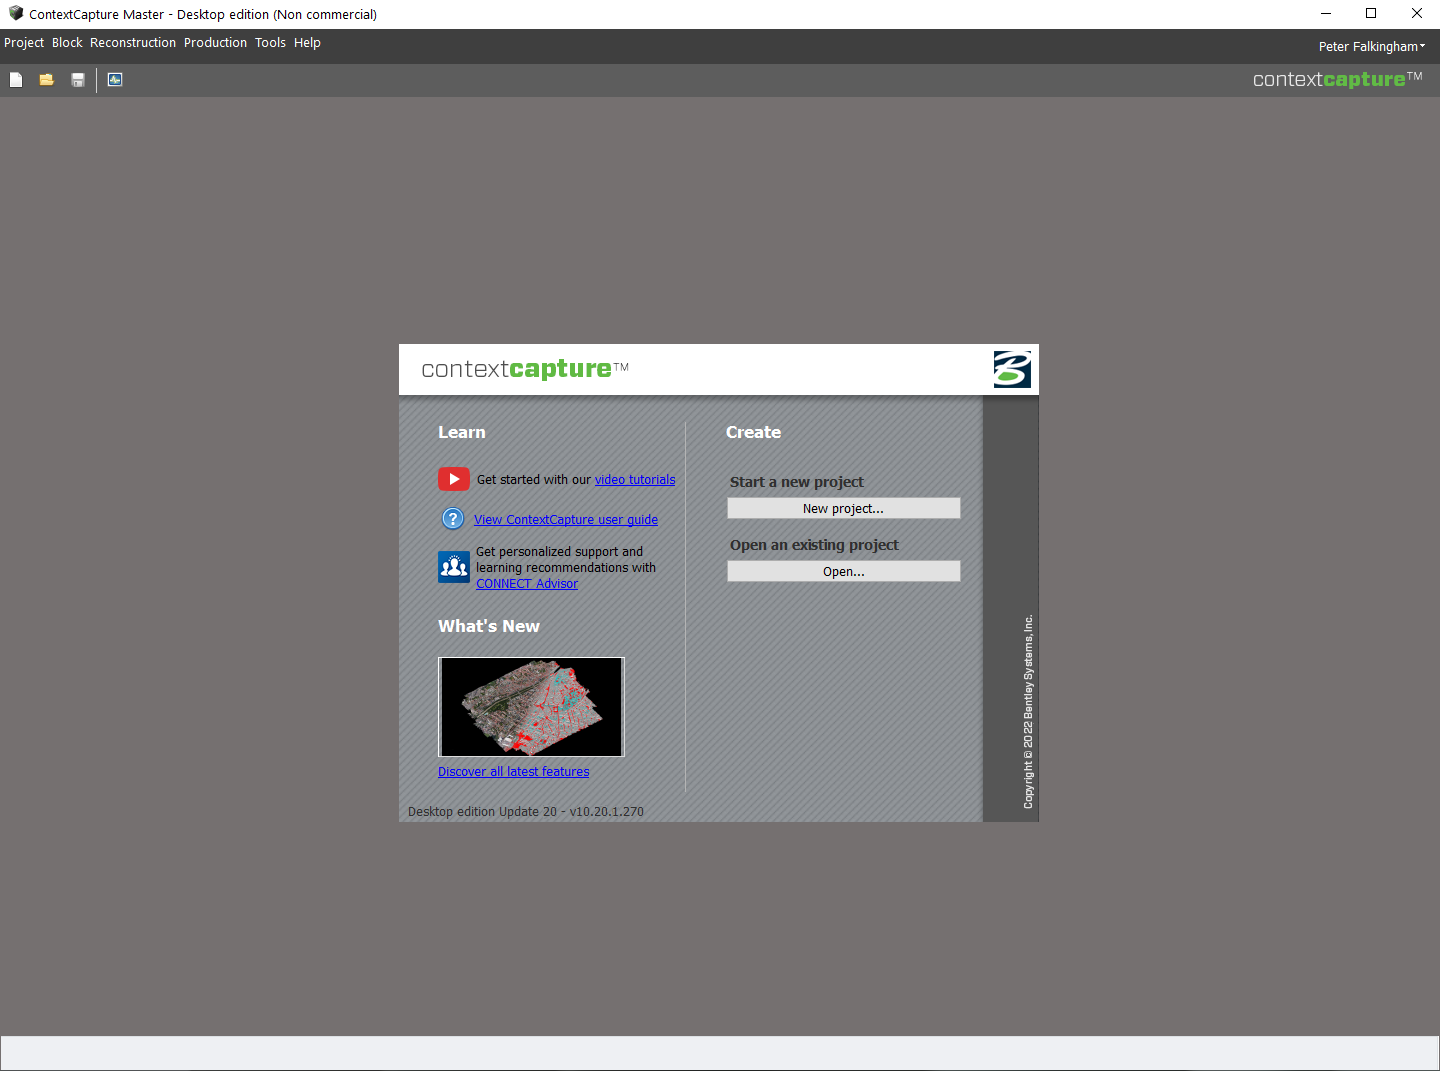 Working with Bentley ContextCapture Center CONNECT Edition 10.20.1.5562